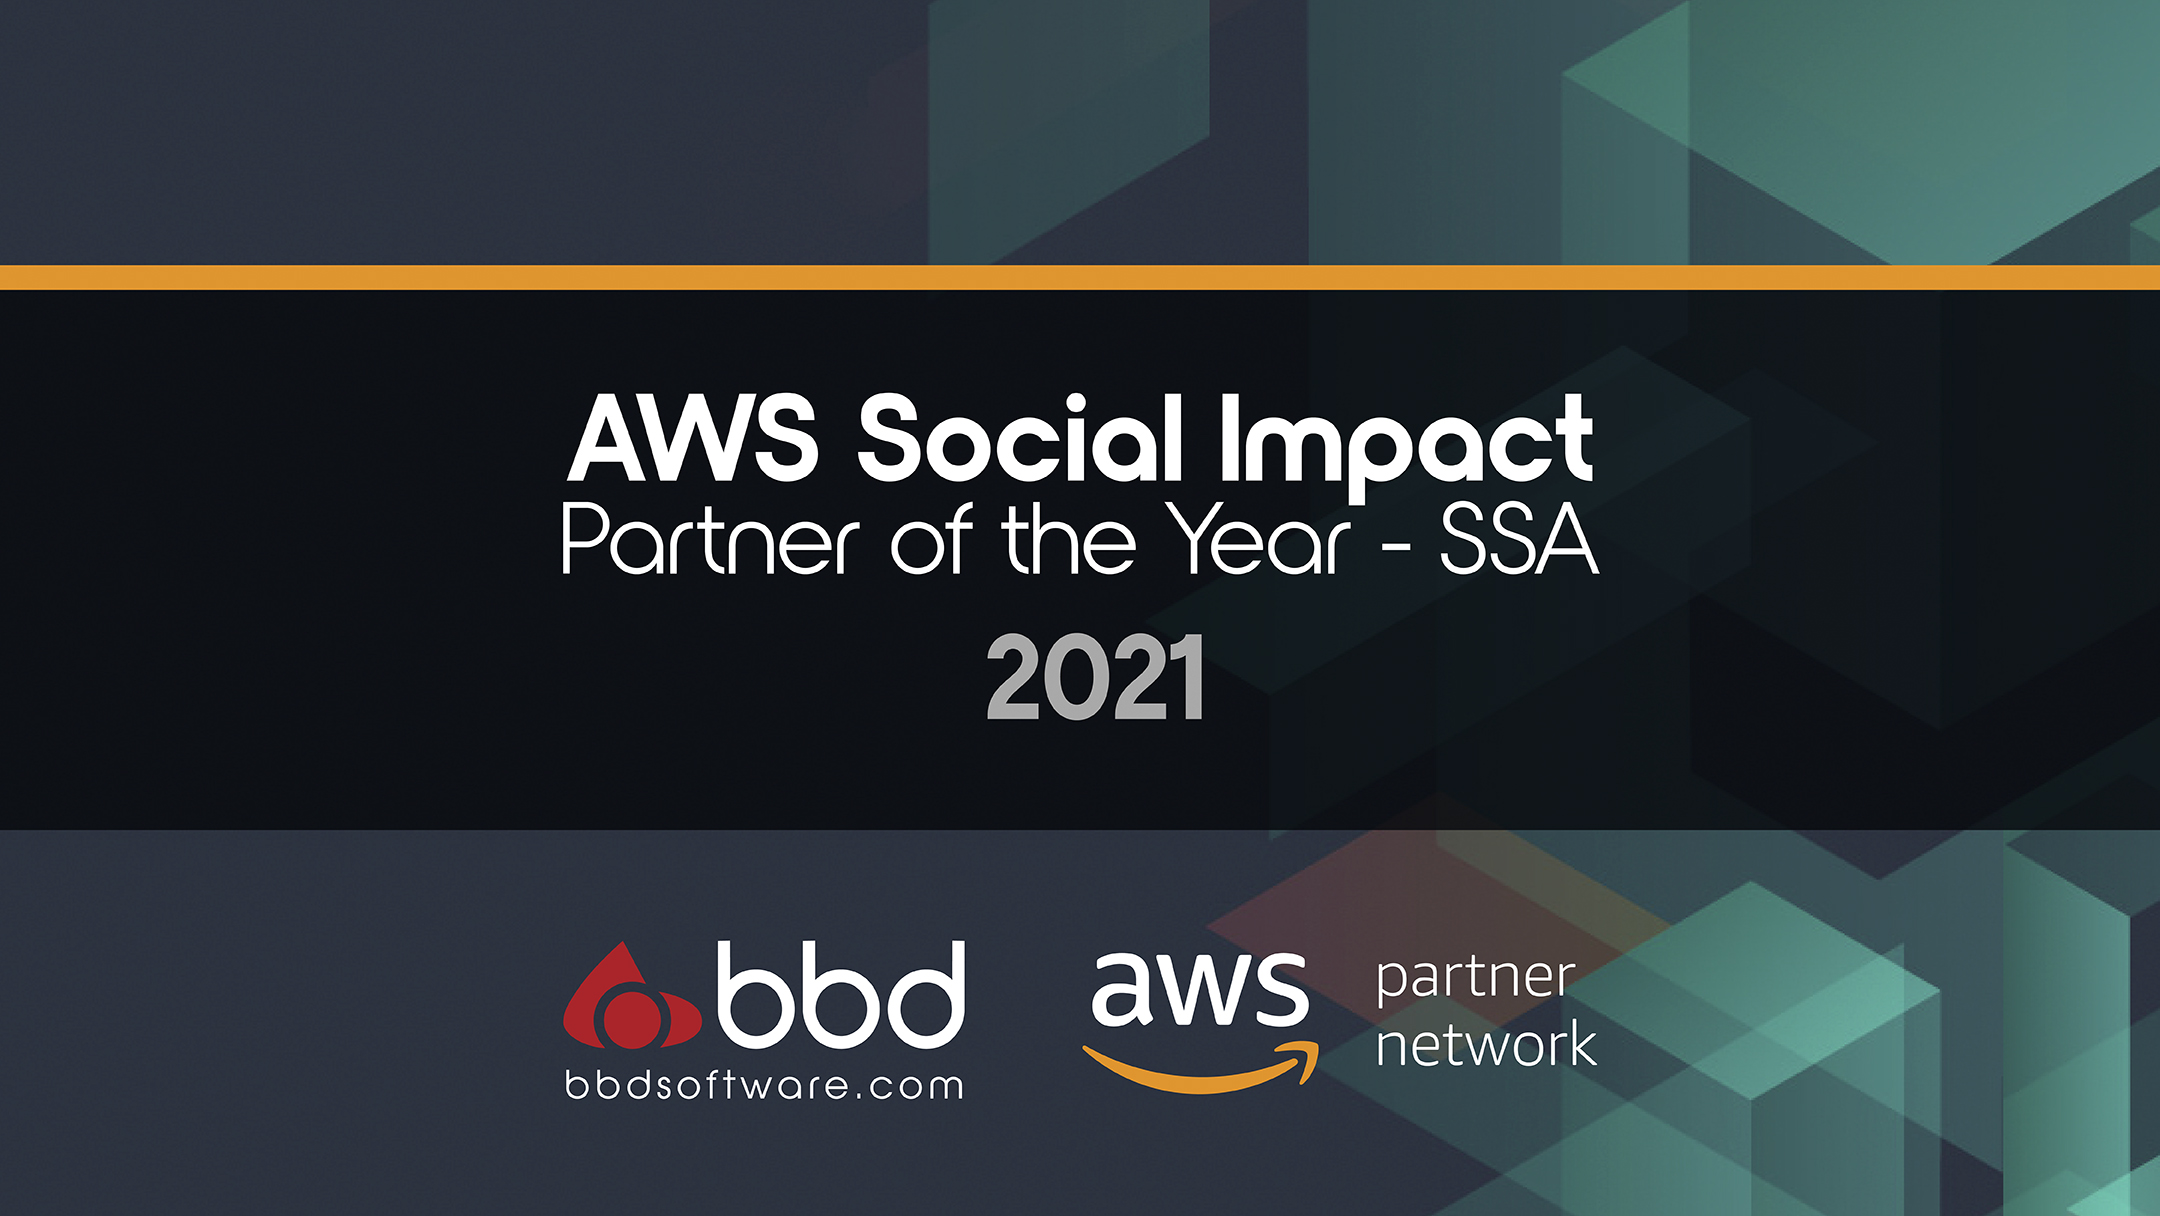 BBD awarded AWS Social Impact Partner of the Year – SSA